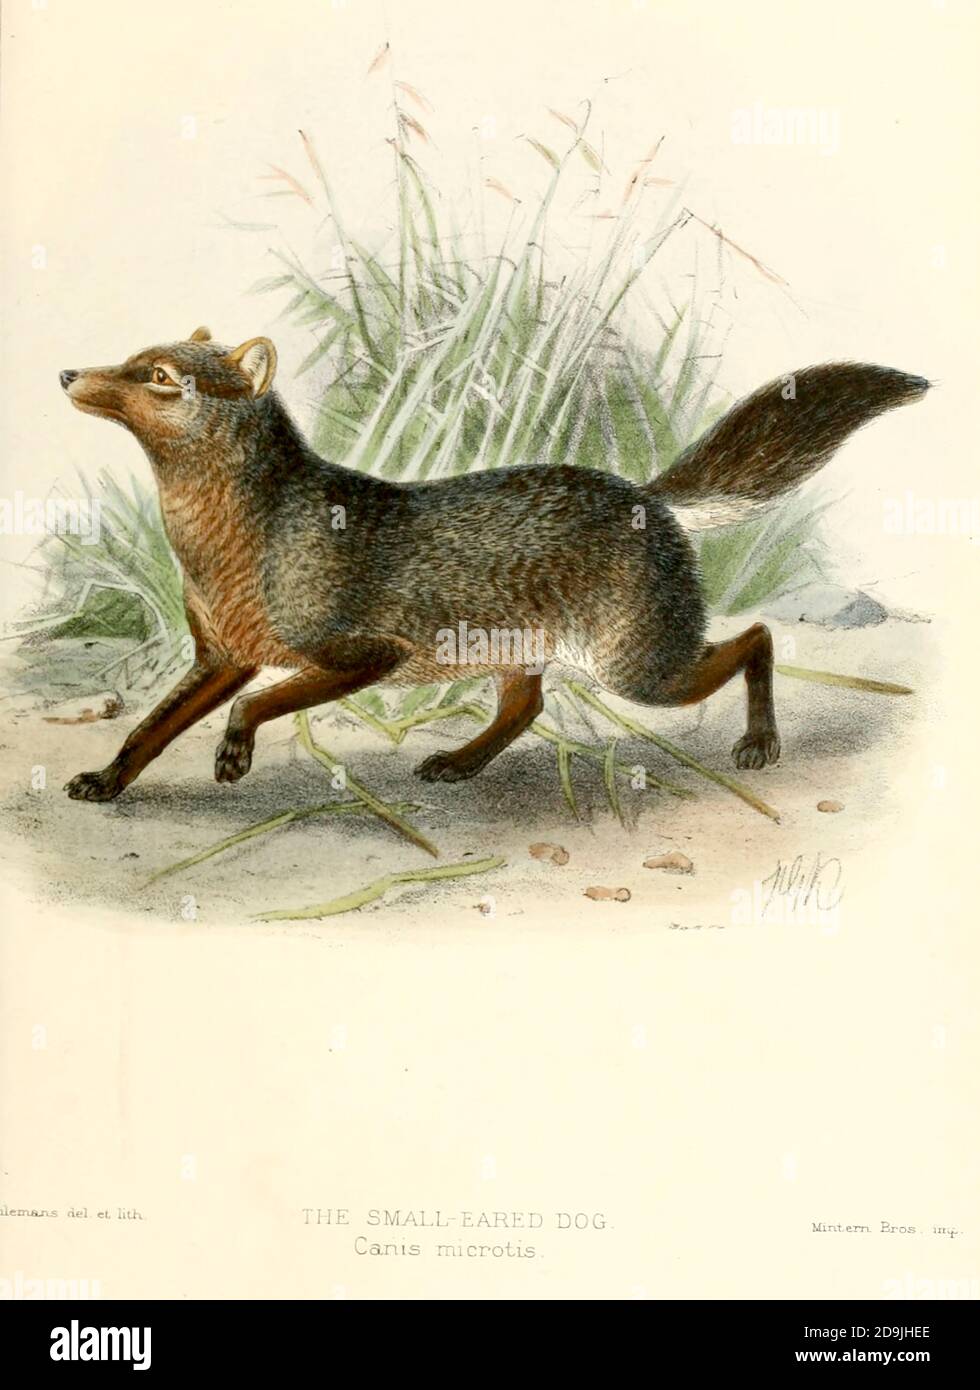 The short-eared dog (Atelocynus microtis [Here as Canis microtis]), also known as the short-eared zorro and small-eared dog, is a unique and elusive canid species endemic to the Amazonian basin. This is the only species assigned to the genus Atelocynus From the Book Dogs, Jackals, Wolves and Foxes A Monograph of The Canidae [from Latin, canis, 'dog') is a biological family of dog-like carnivorans. A member of this family is called a canid] By George Mivart, F.R.S. with woodcuts and 45 coloured plates drawn from nature by J. G. Keulemans and Hand-Coloured. Published by R. H. Porter, London, 189 Stock Photo